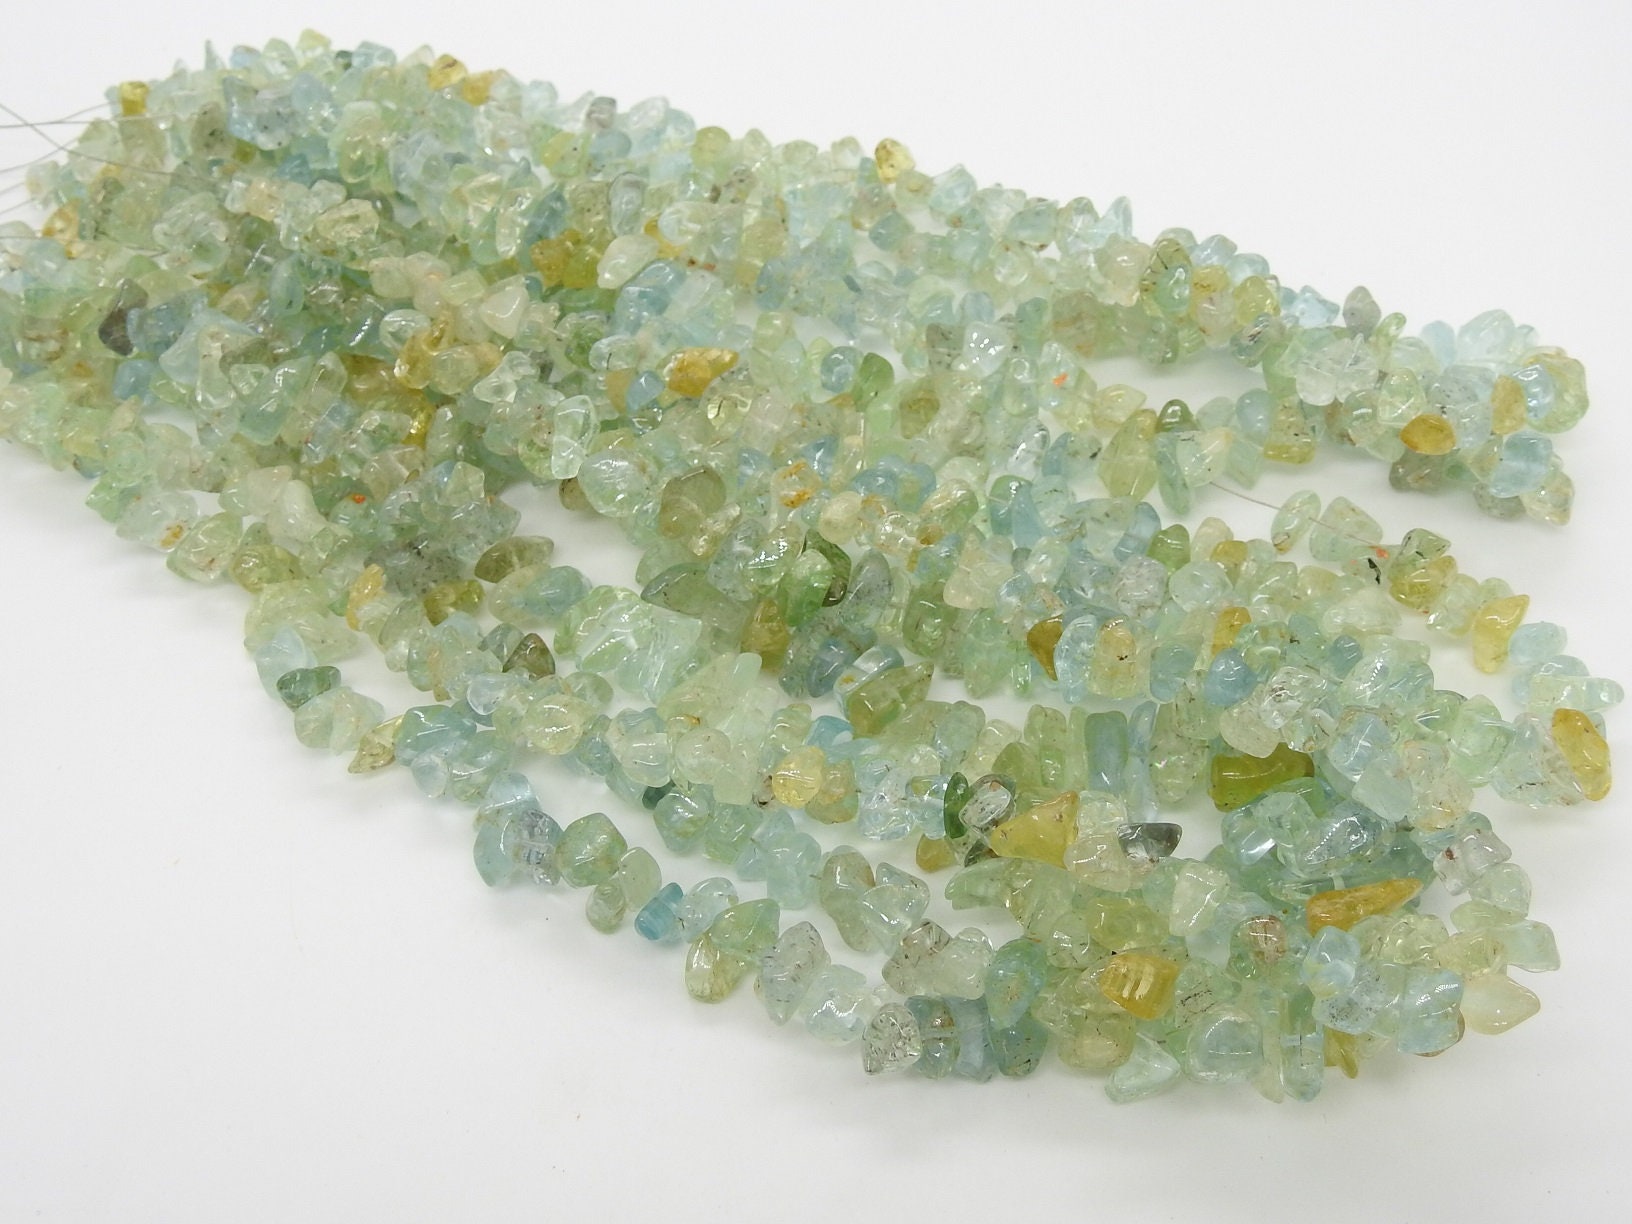 100%Natural,Aquamarine Polished Rough Beads,Anklets,Chips,Uncut 10X5To5X4MM Approx,Wholesale Price,New Arrival RB1 | Save 33% - Rajasthan Living 24